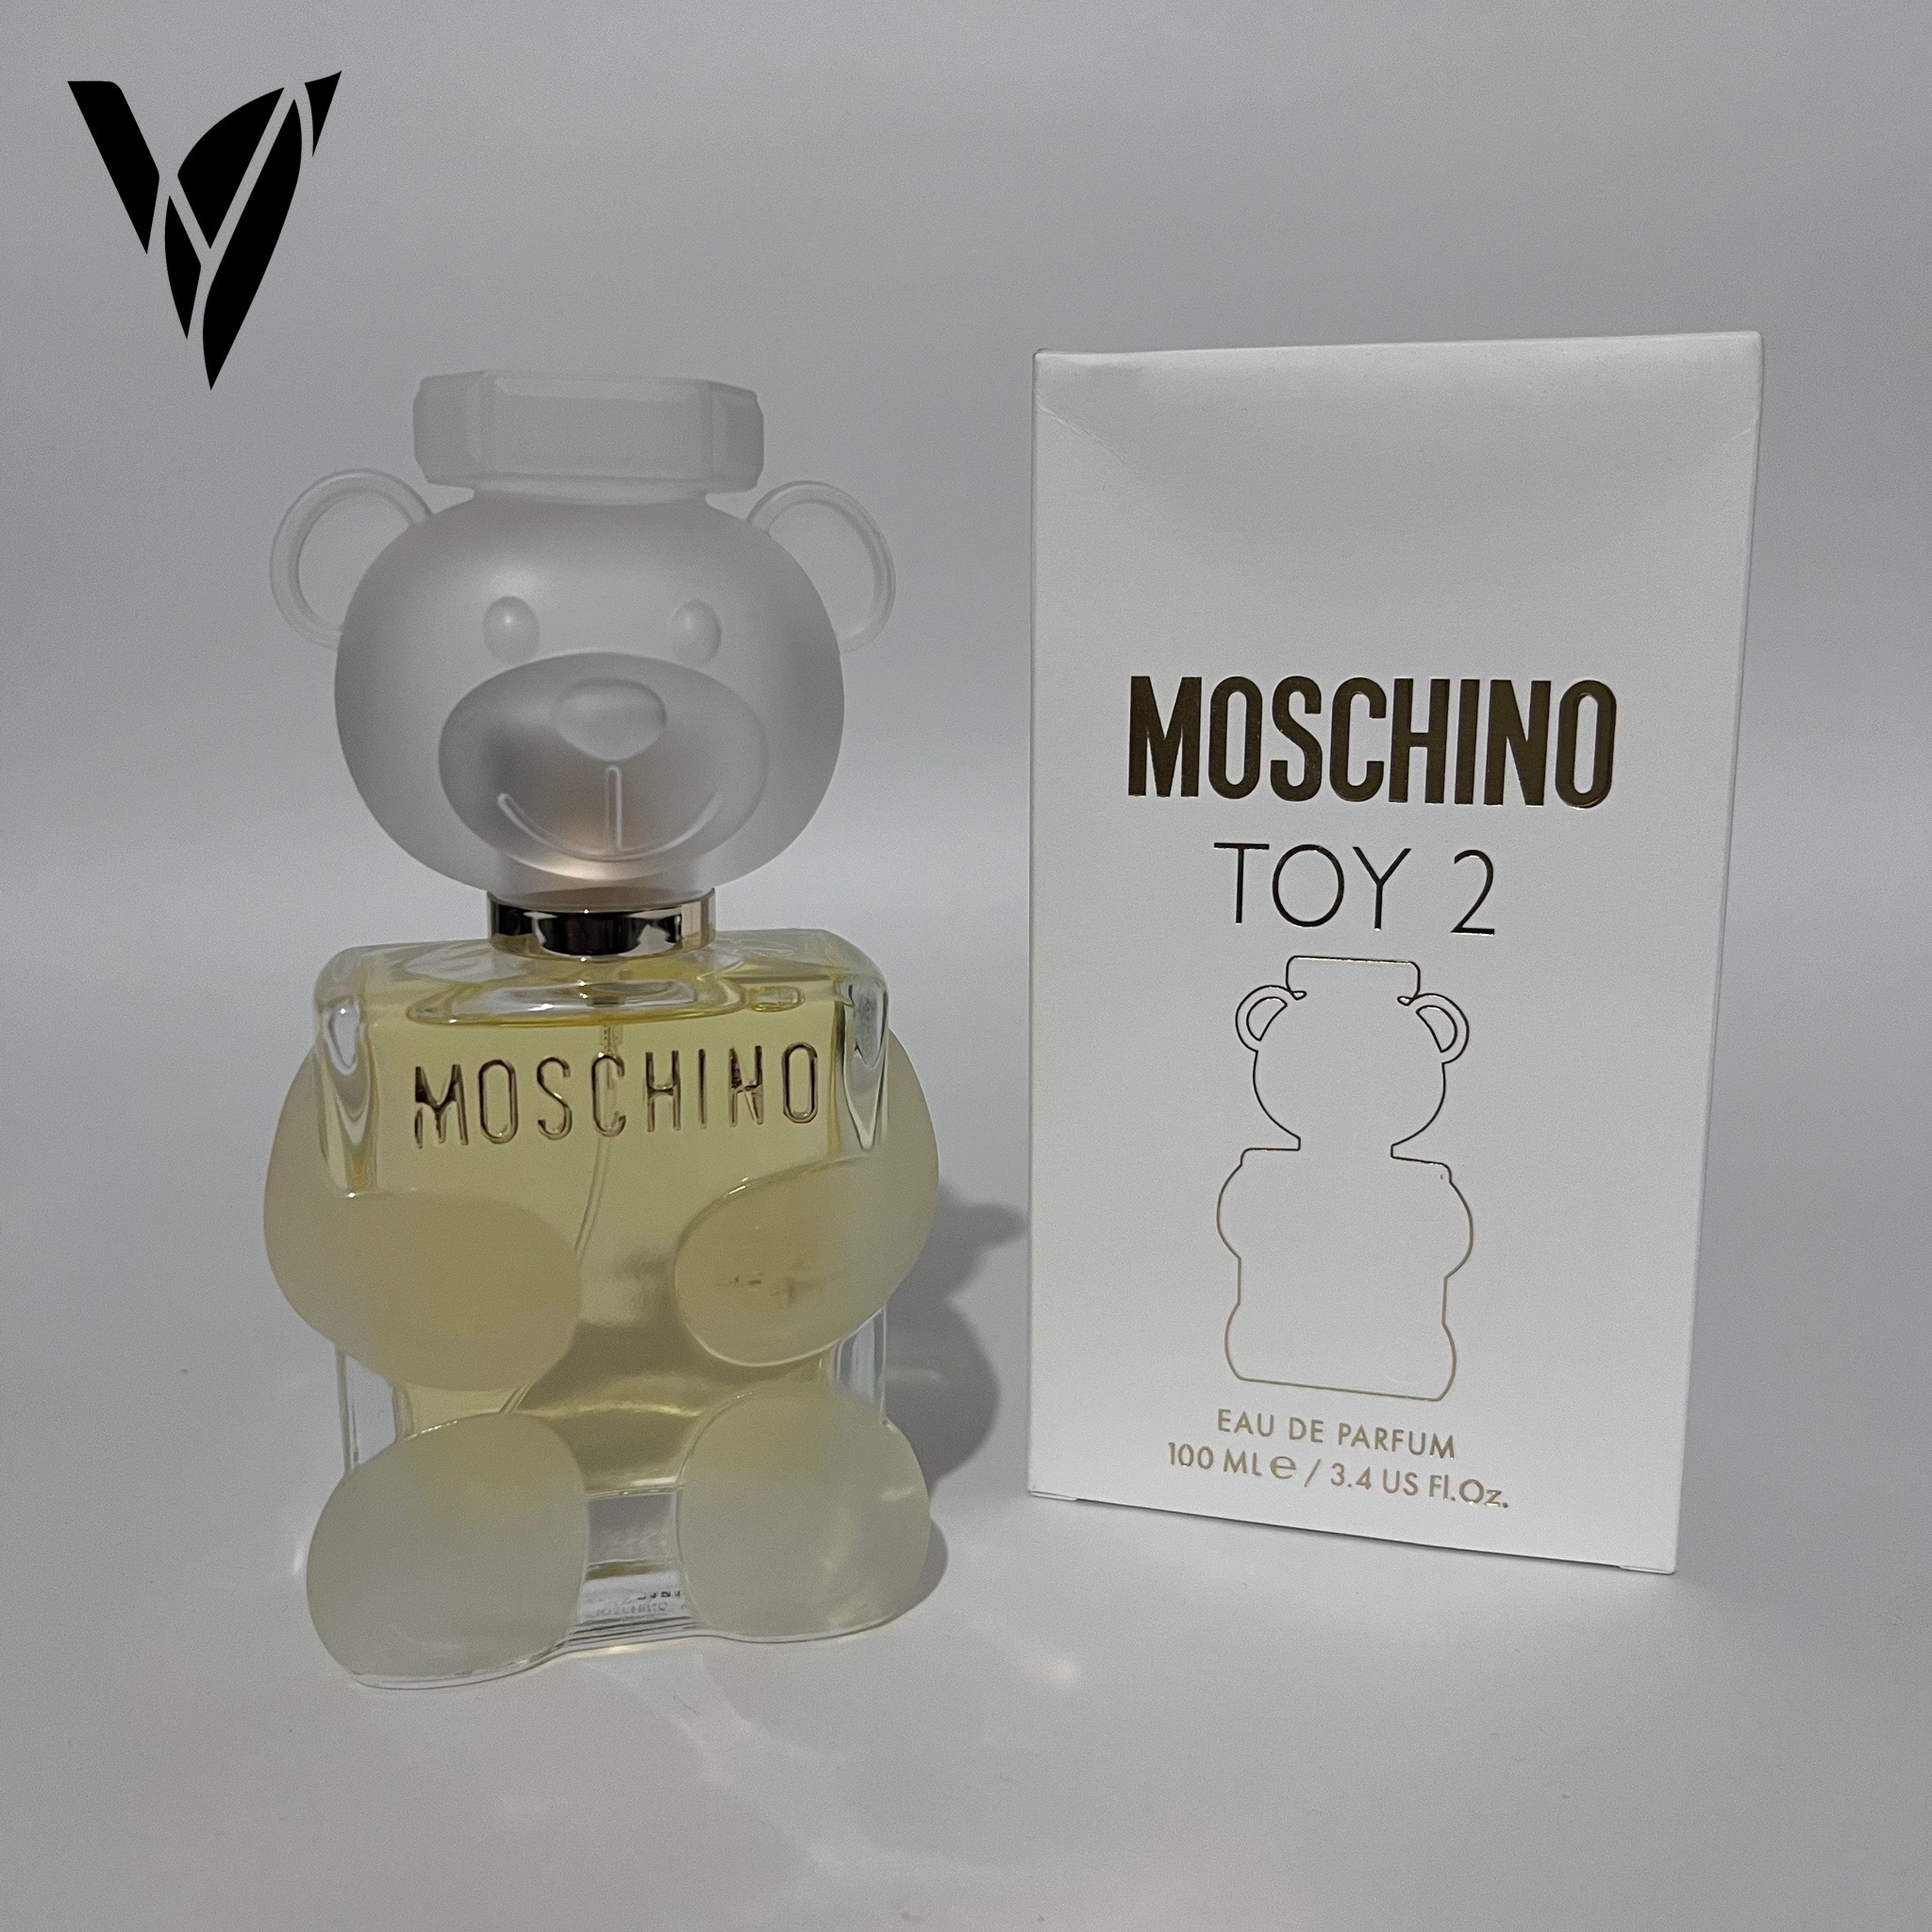 Toy 2 Moschino 1.1 + Decant